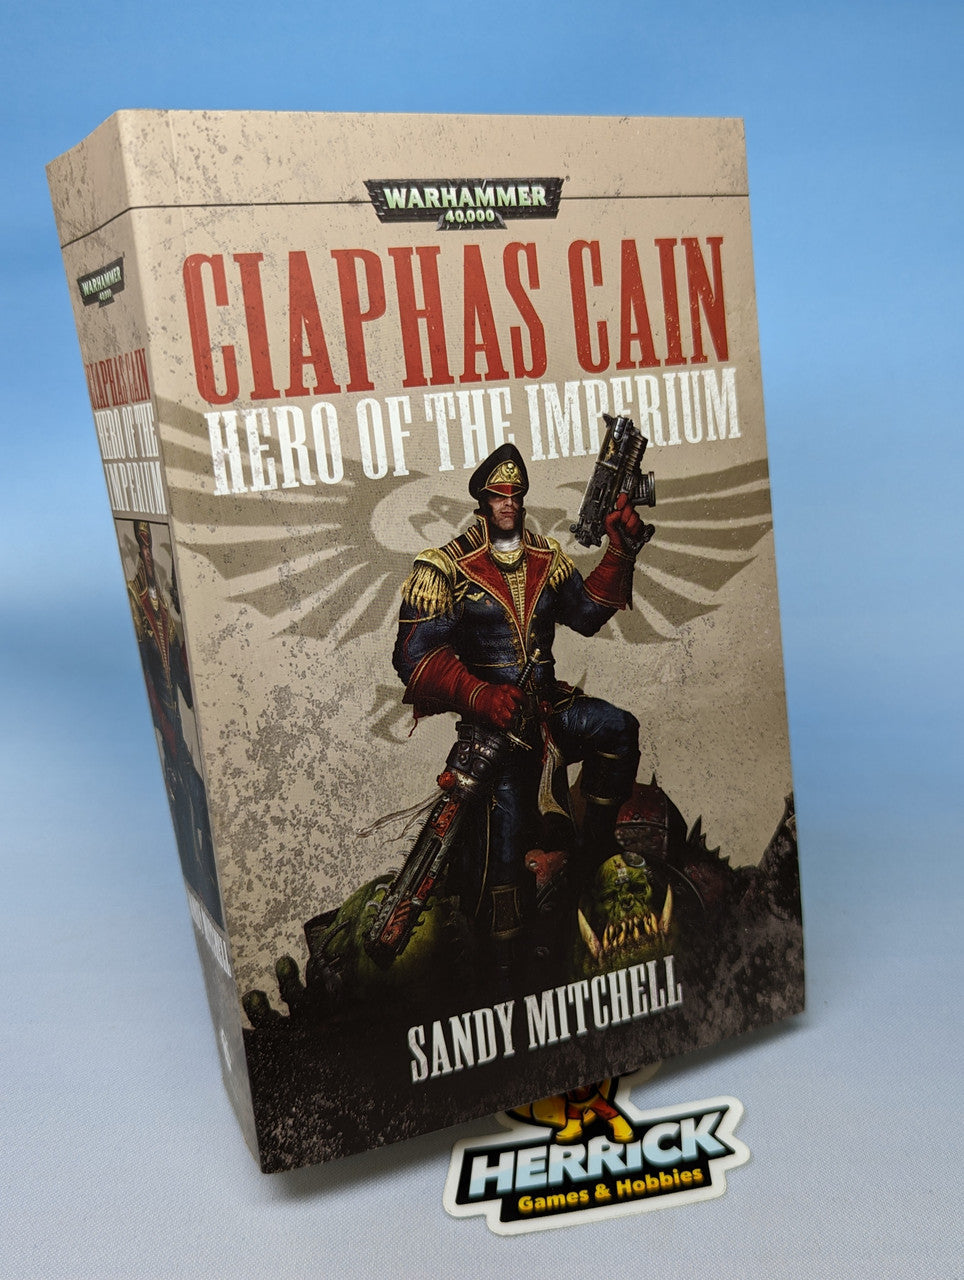 Novel: Ciaphas Cain: Hero of The Imperium